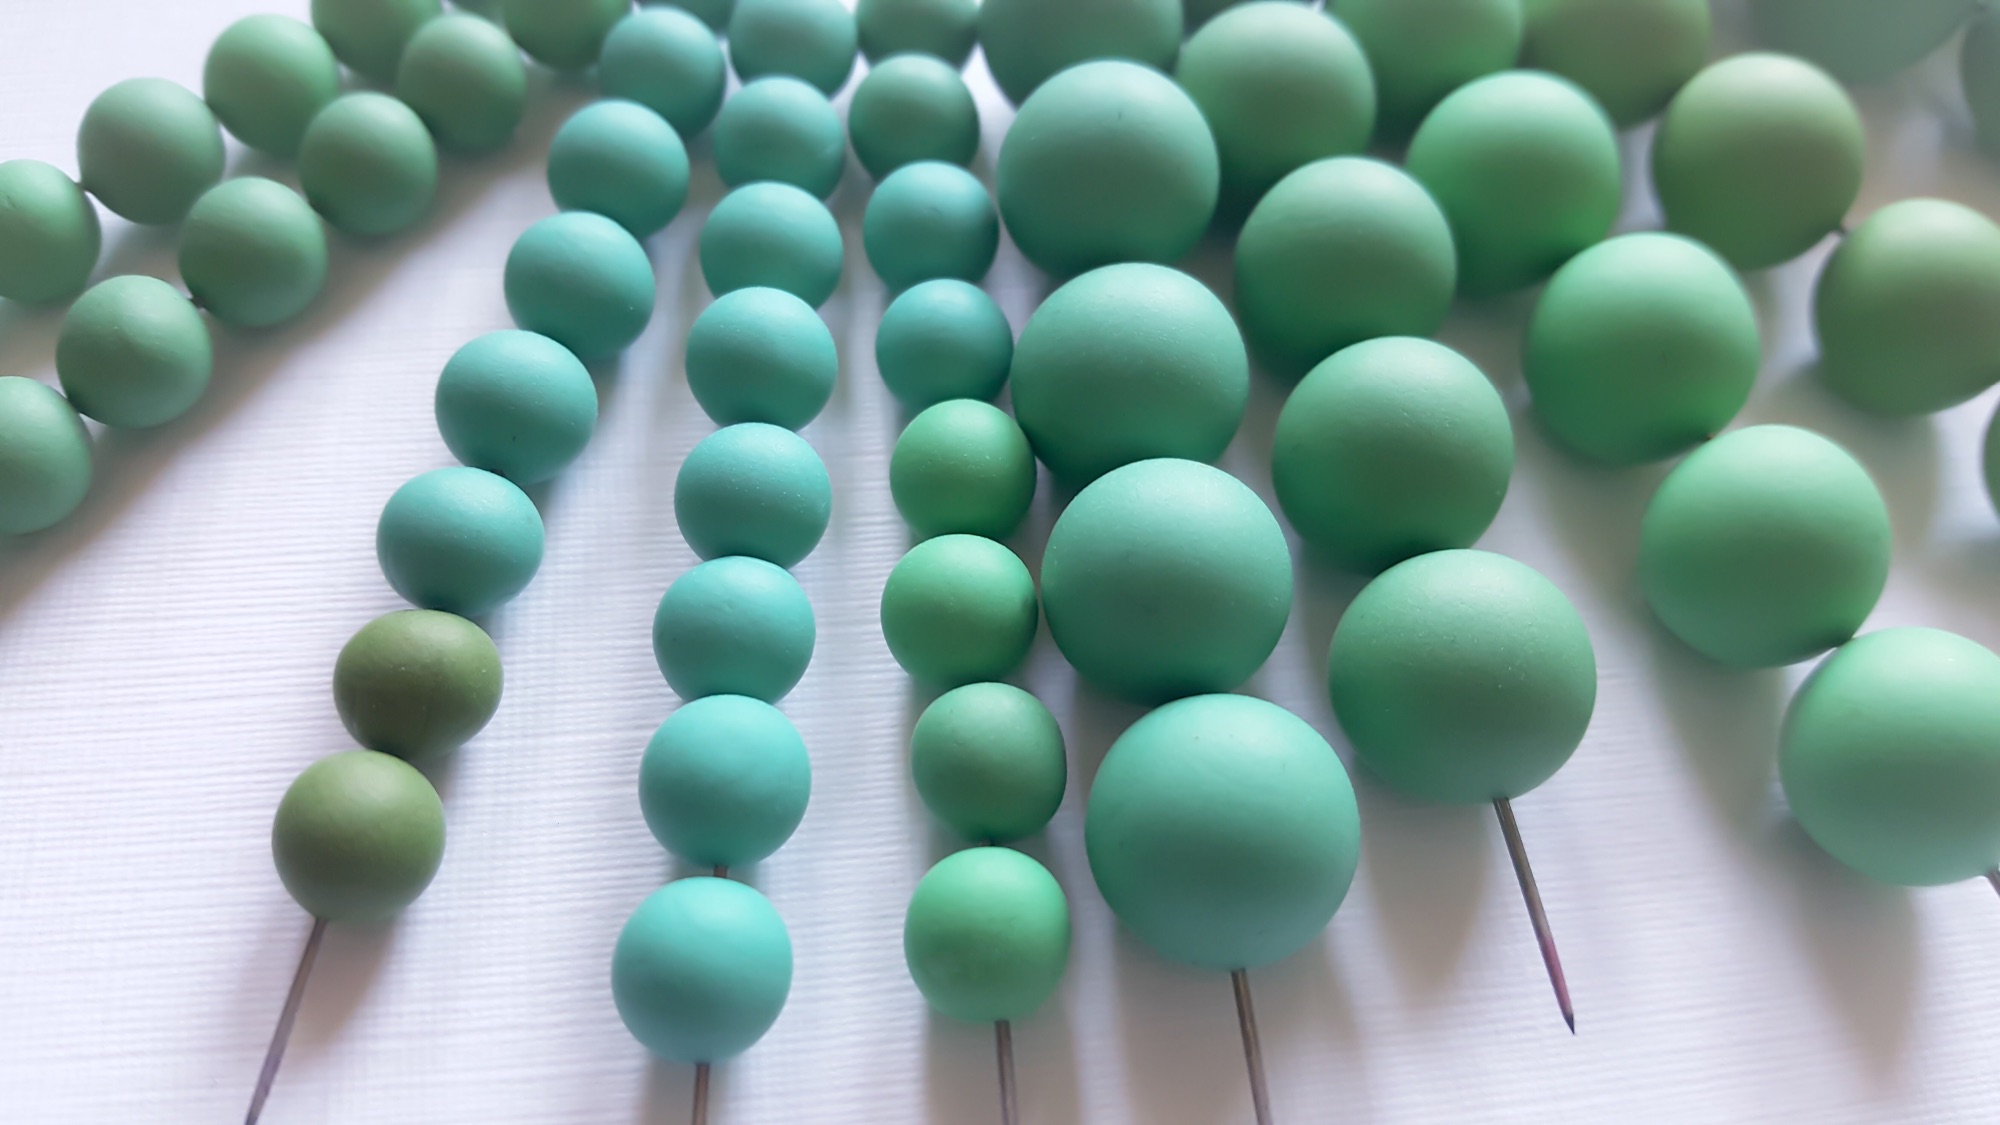 Handmade round polymer clay beads in shades of blue and green